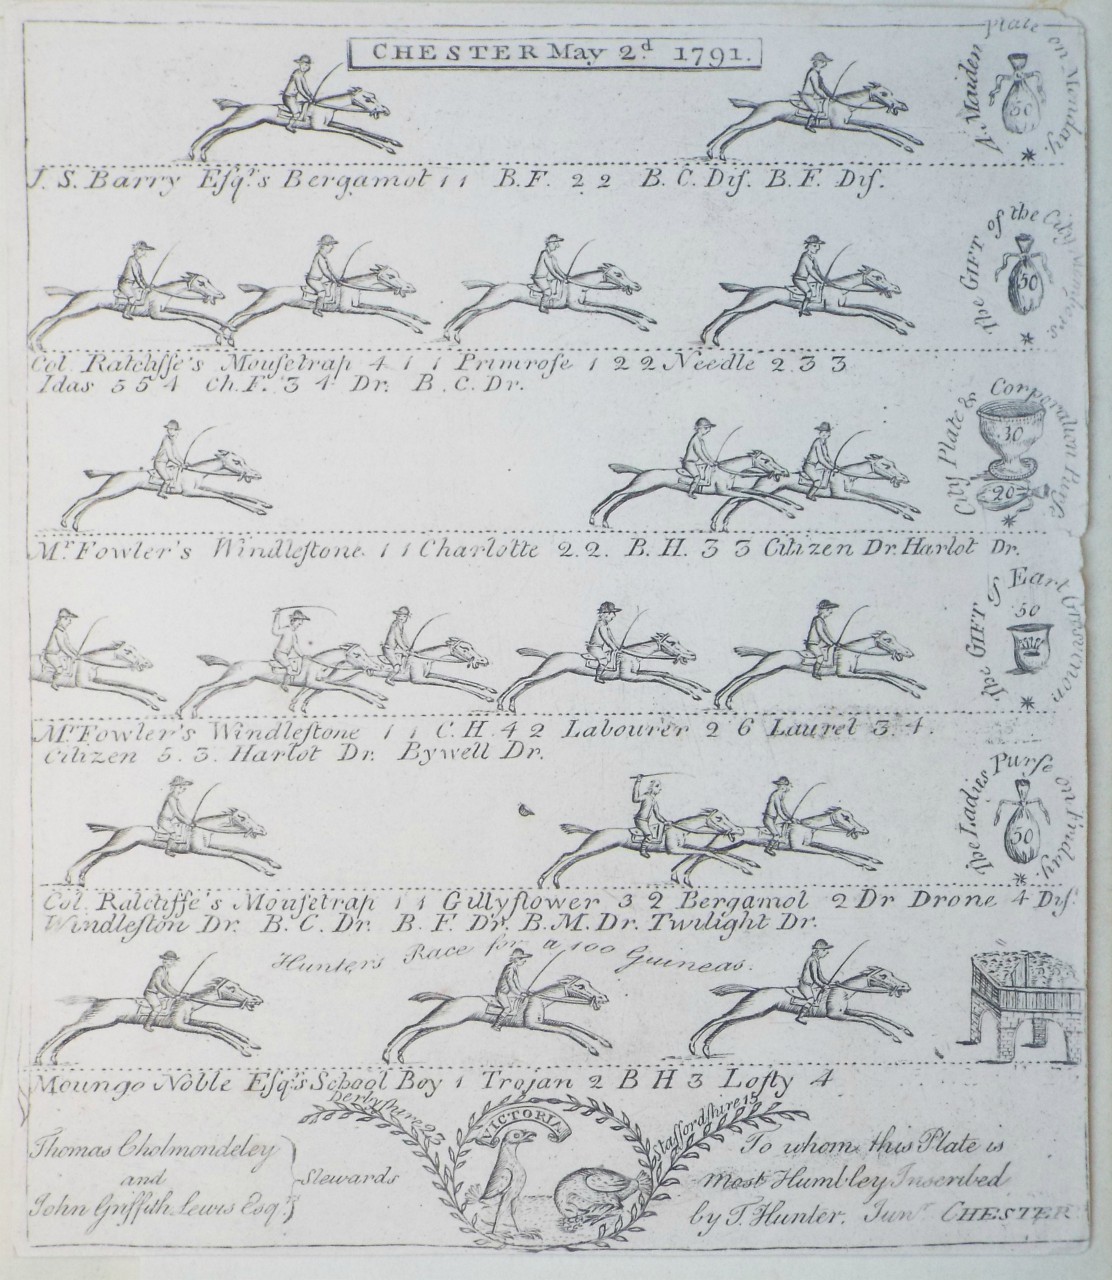 Print - Chester May 2d. 1791.